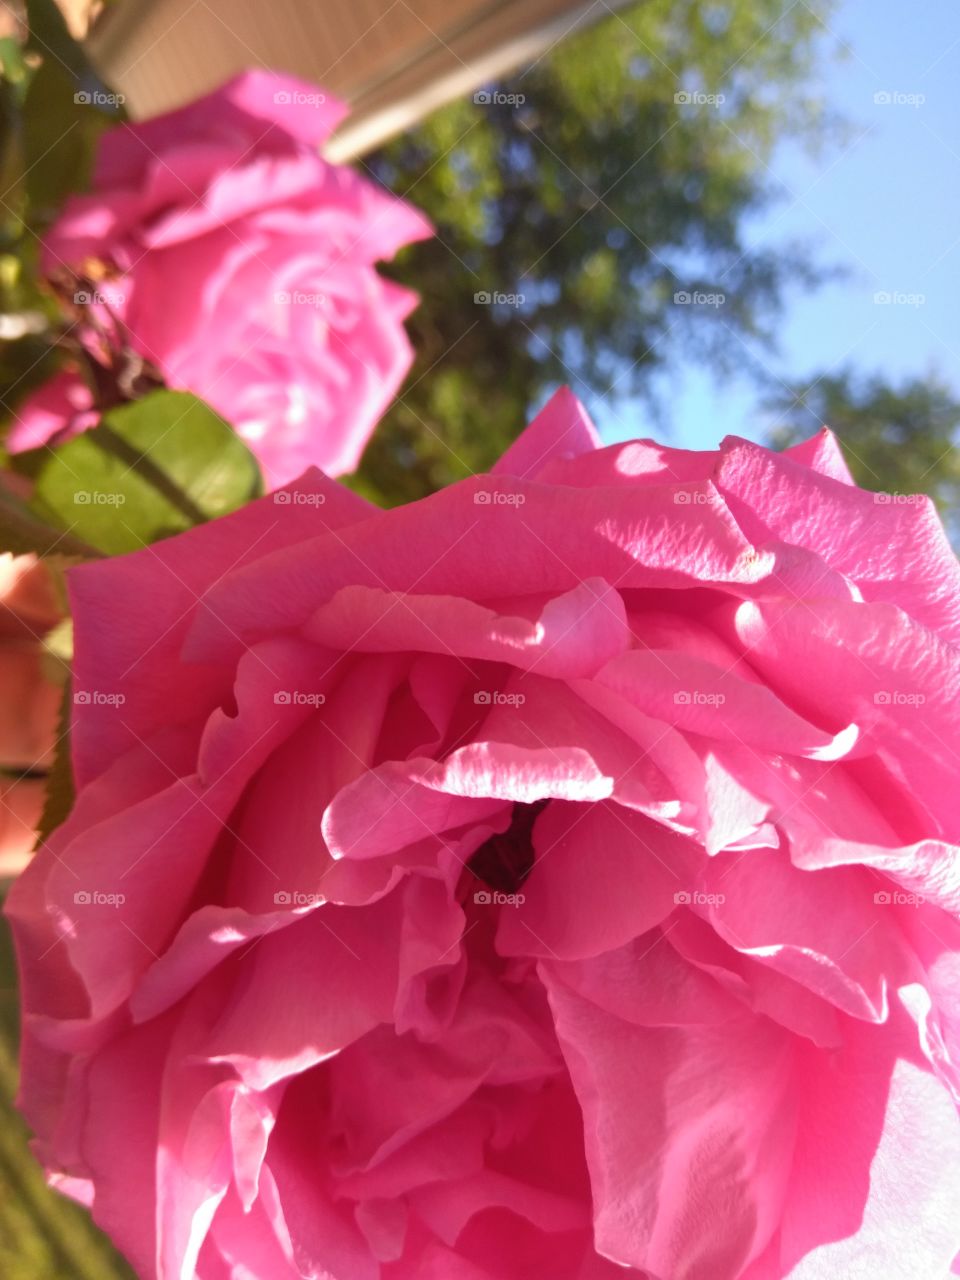 A beautiful mother's day bloom of a pink hybrid rose behind a family home. Her fragrance was intoxicating.